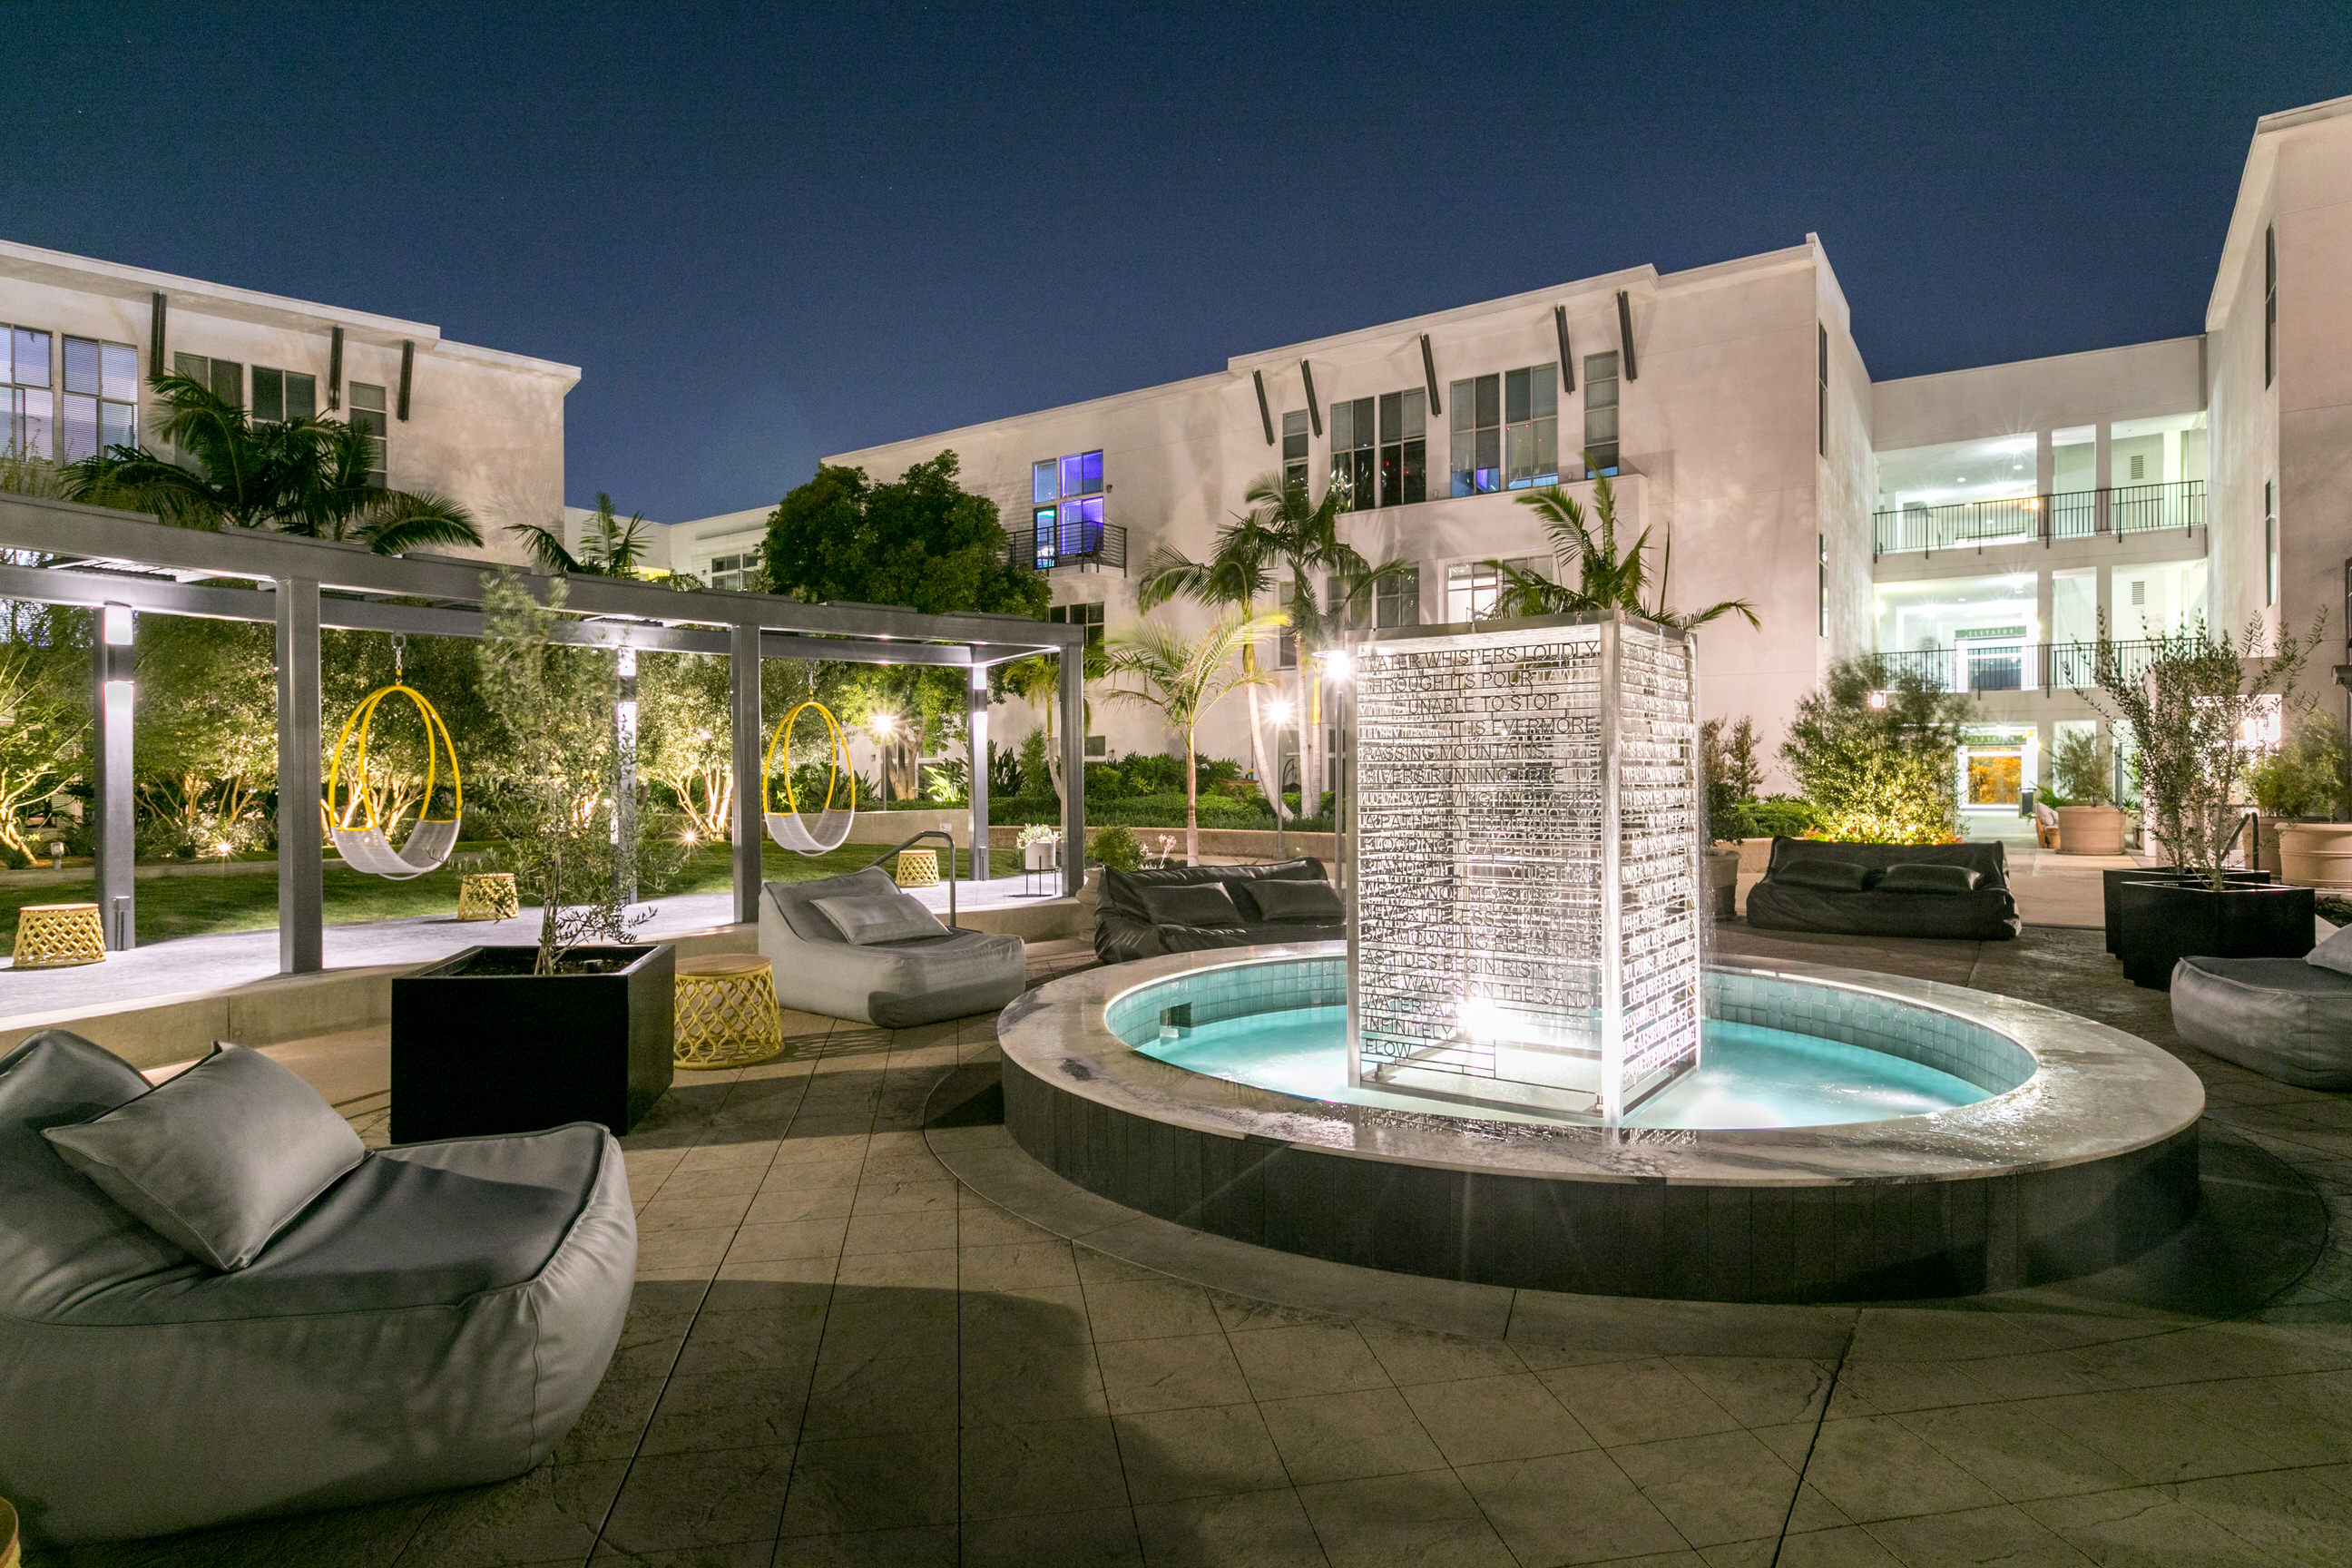 Photo of outdoor water feature at Lofts at NoHo Commons Apartments in North Hollywood, Los Angeles.